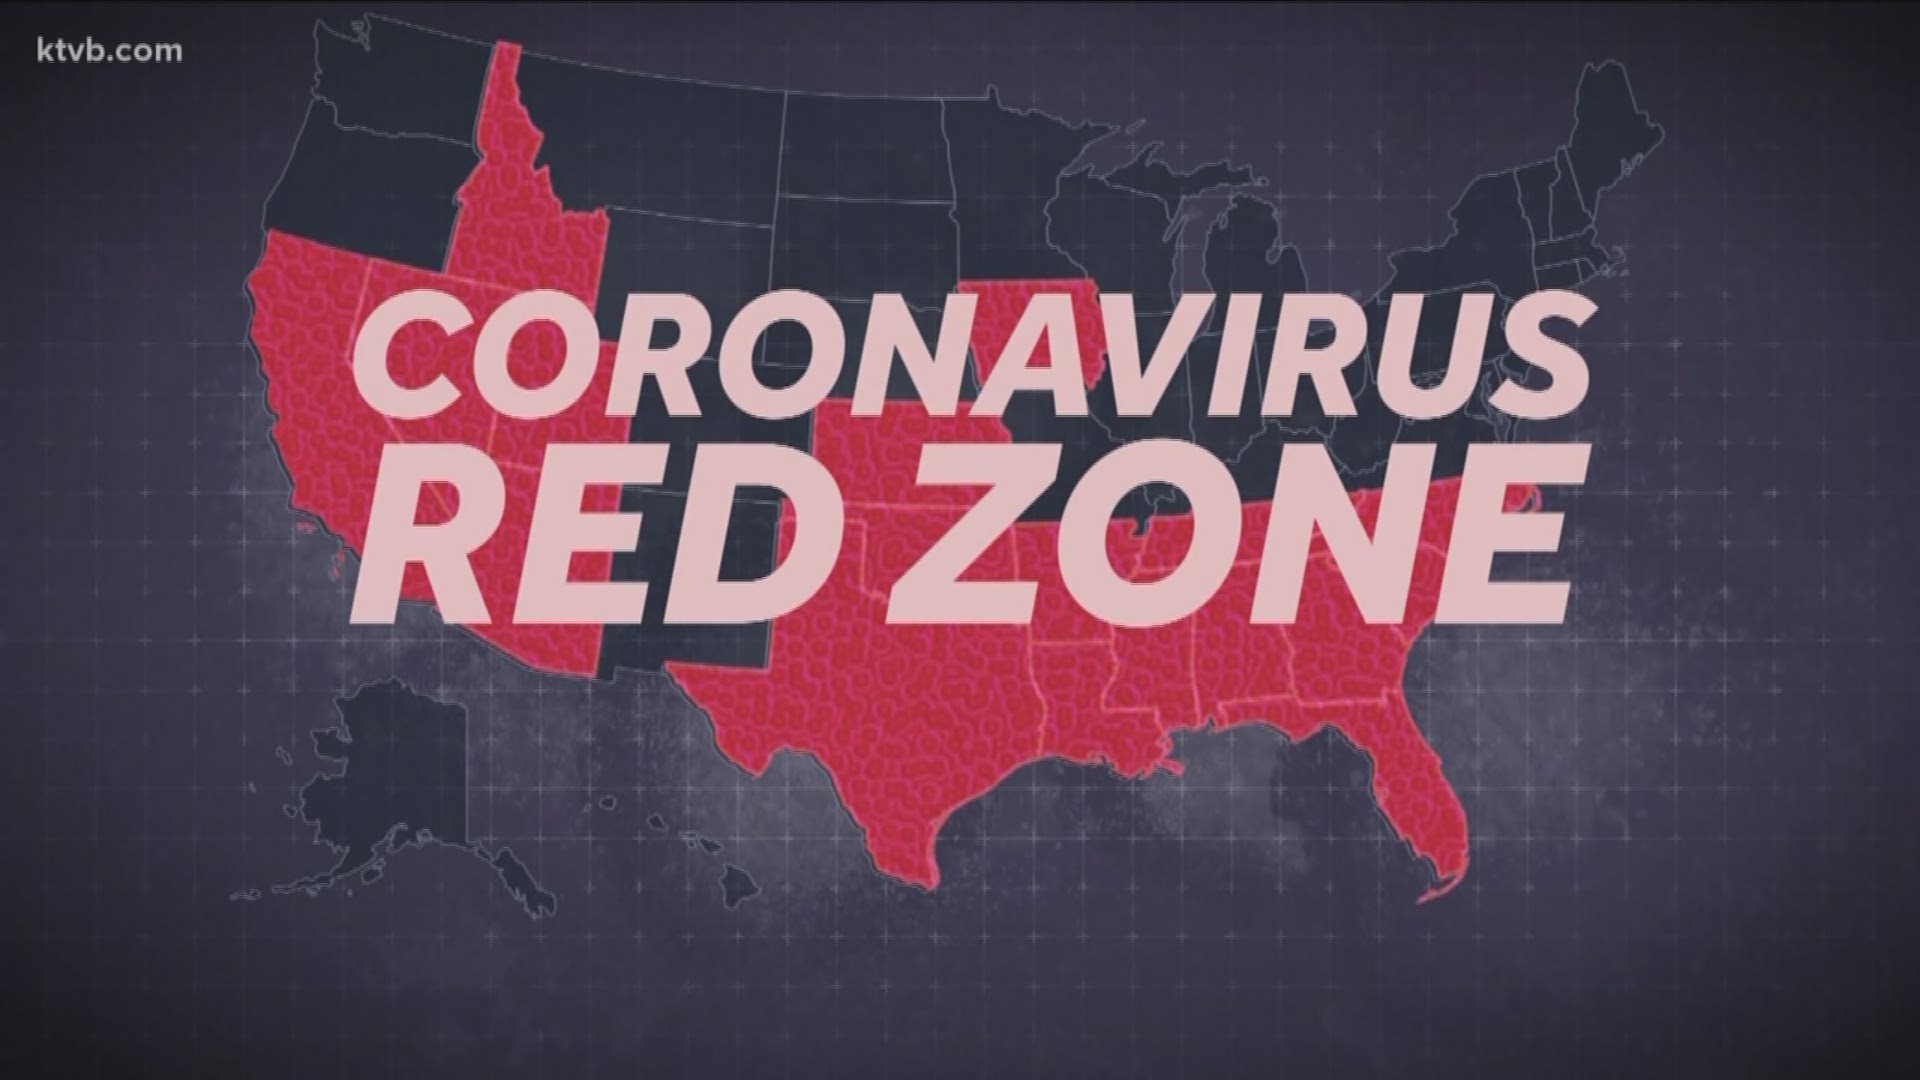 A recent White House report lists Idaho as one of 18 "red zone" states for COVID-19. Hear what a doctor on the state coronavirus task force had to say about it.